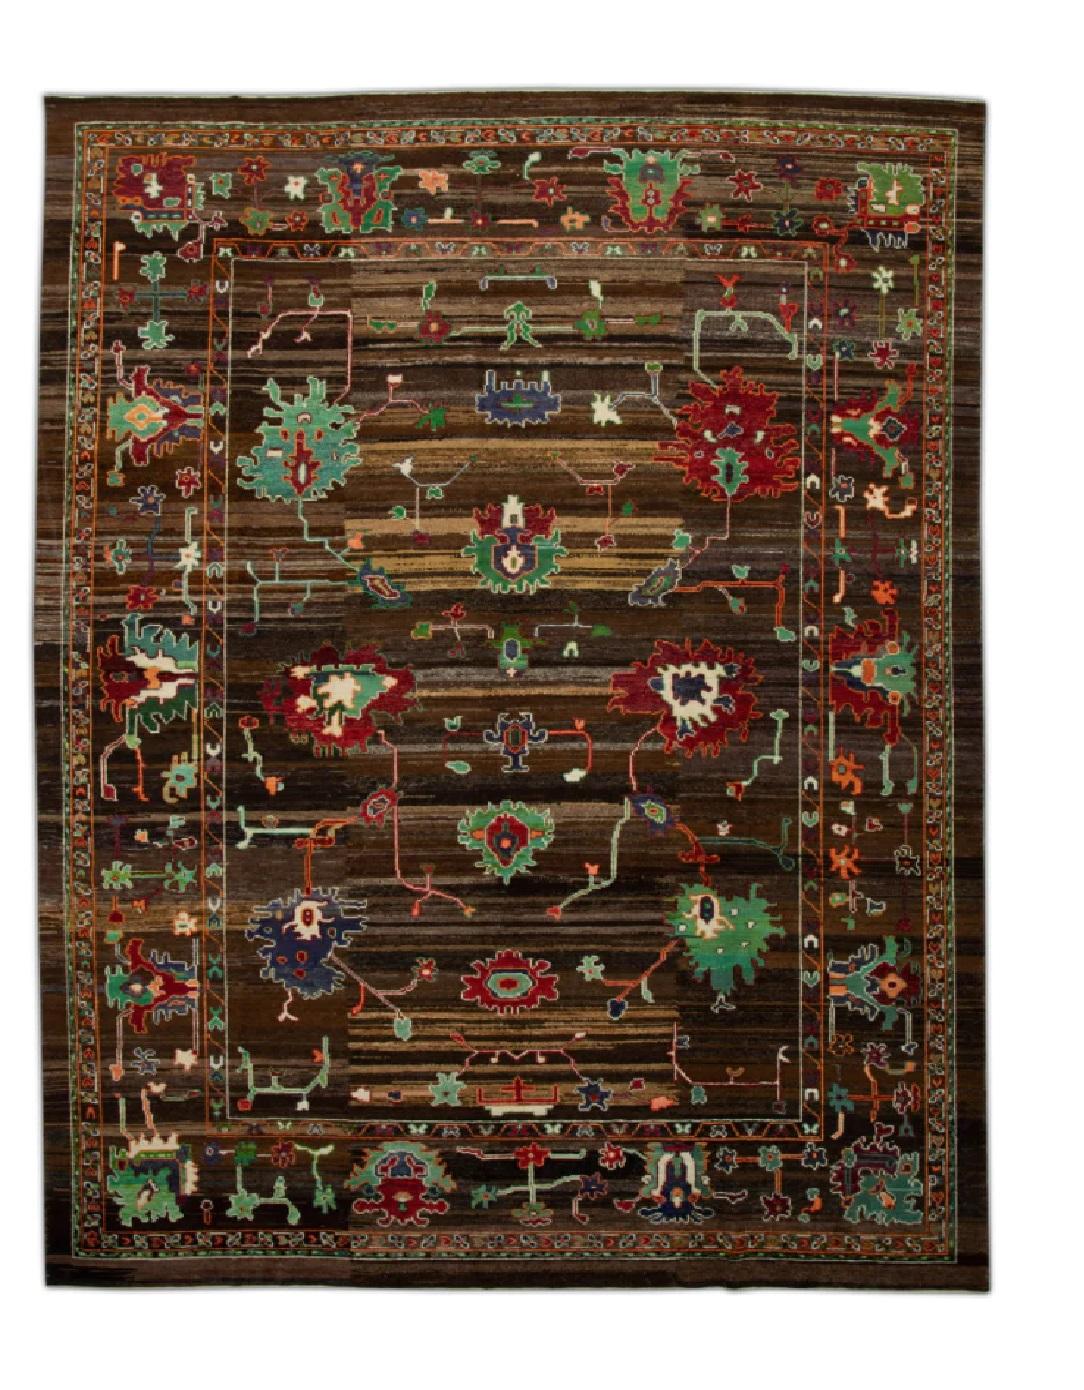 Contemporary Brown Colorful Floral Design Handwoven Old Wool Turkish Oushak Rug 10'2